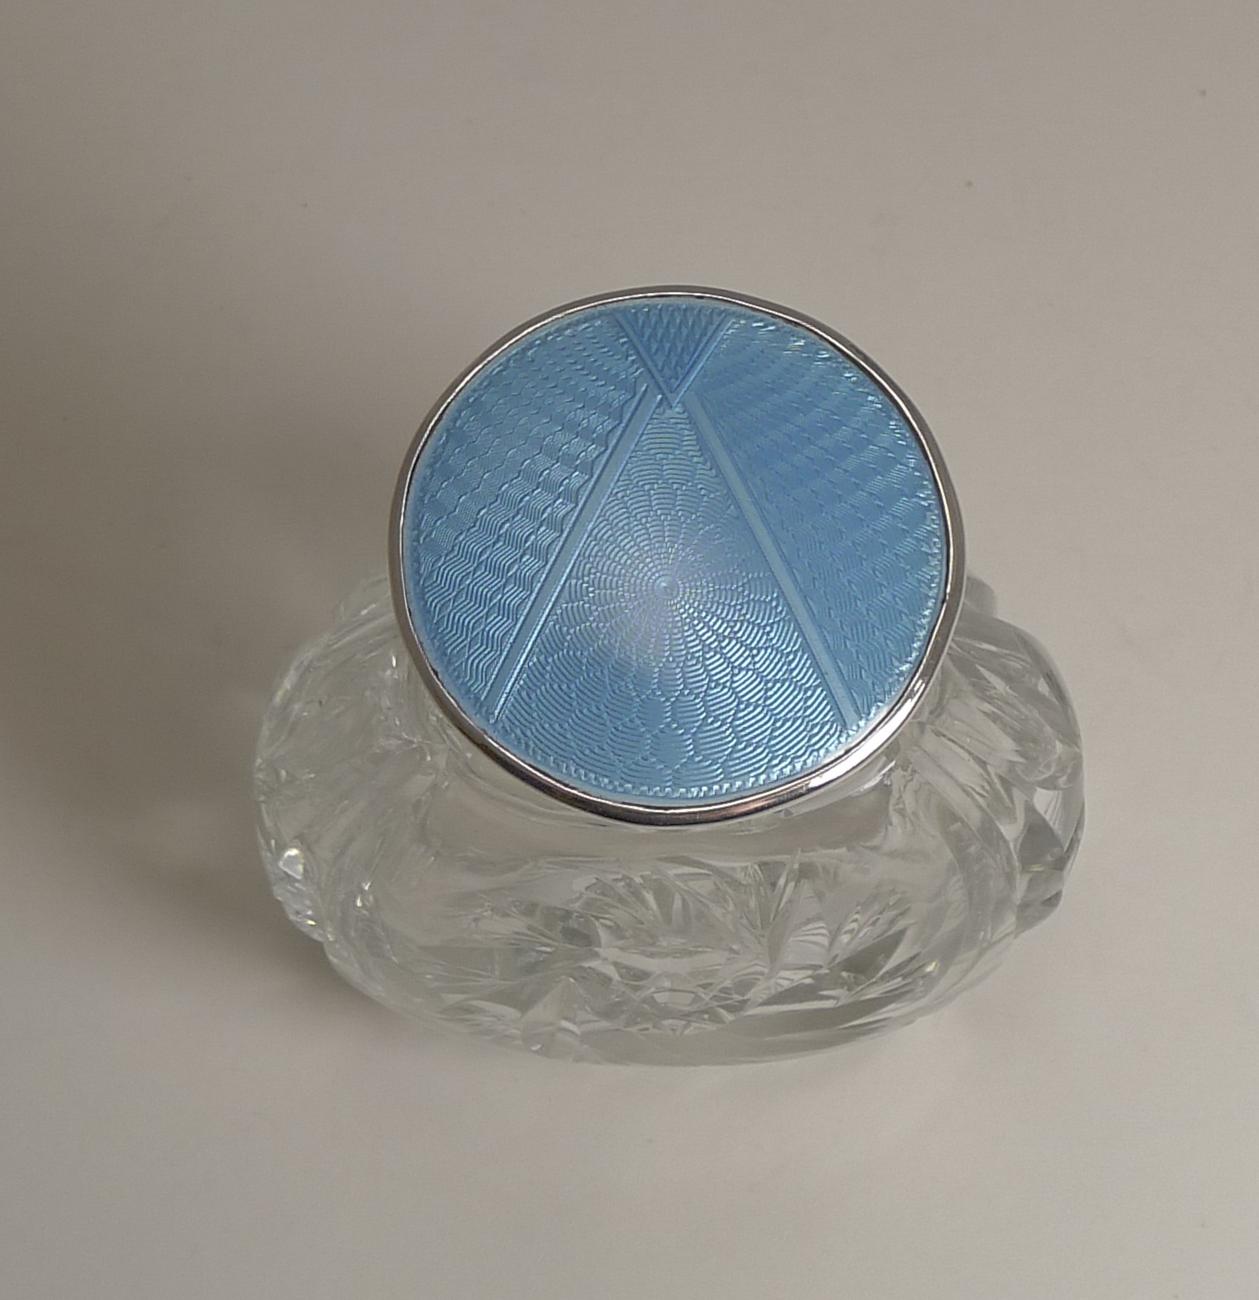 English Art Deco Sterling Silver and Blue Guilloche Enamel Topped Perfume Bottle